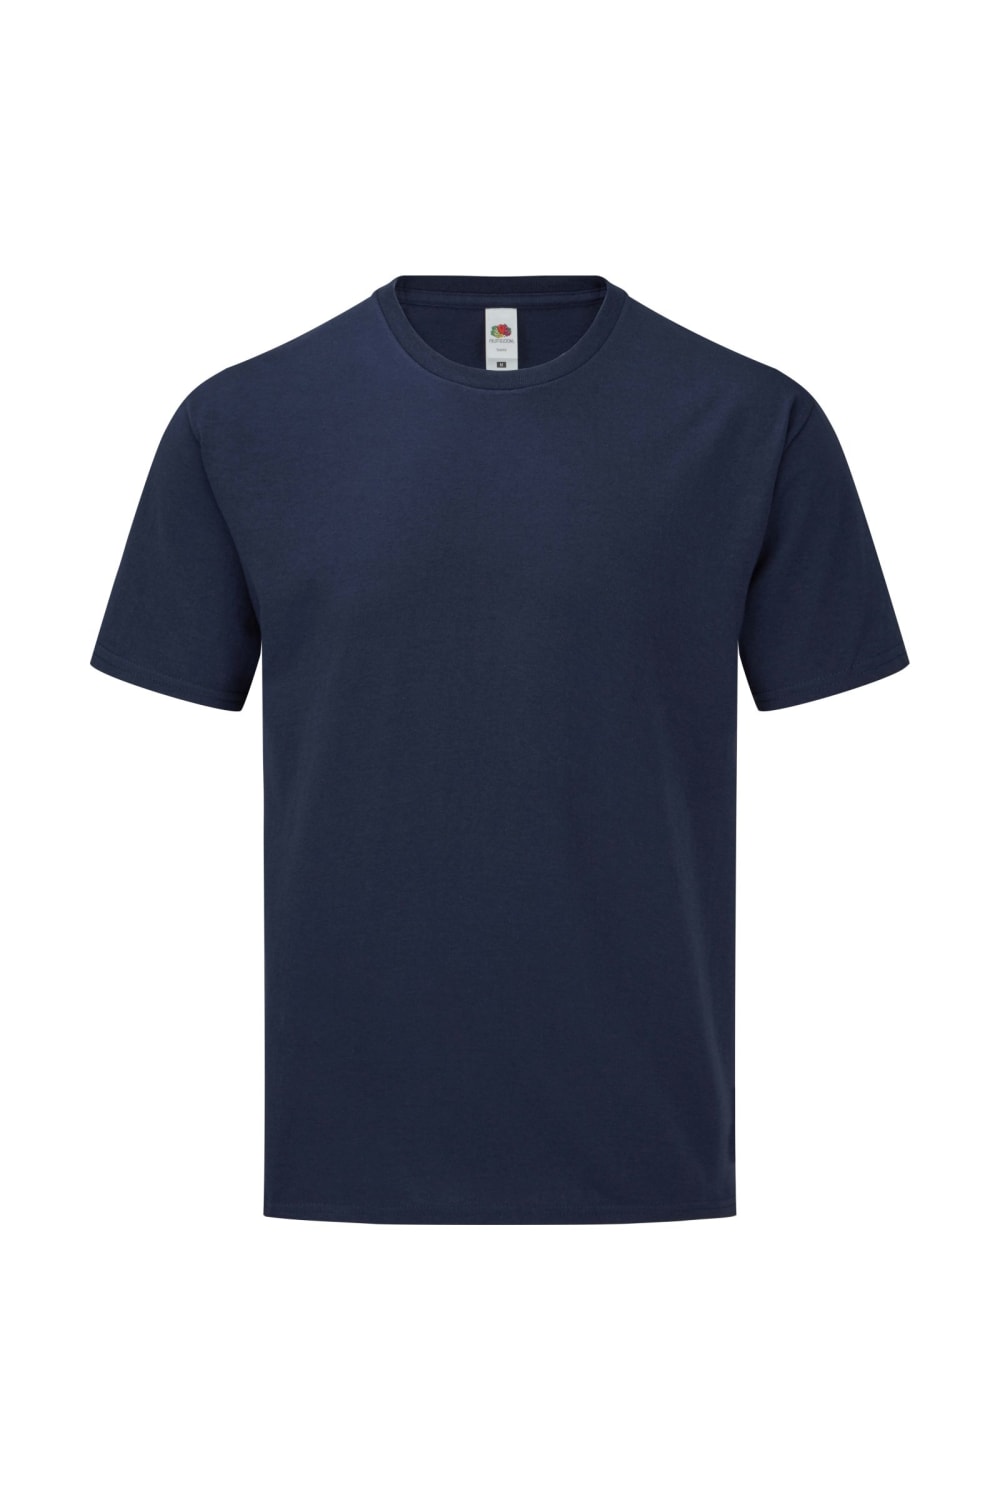 Fruit of the Loom Mens Iconic 165 Classic T-Shirt (Navy)